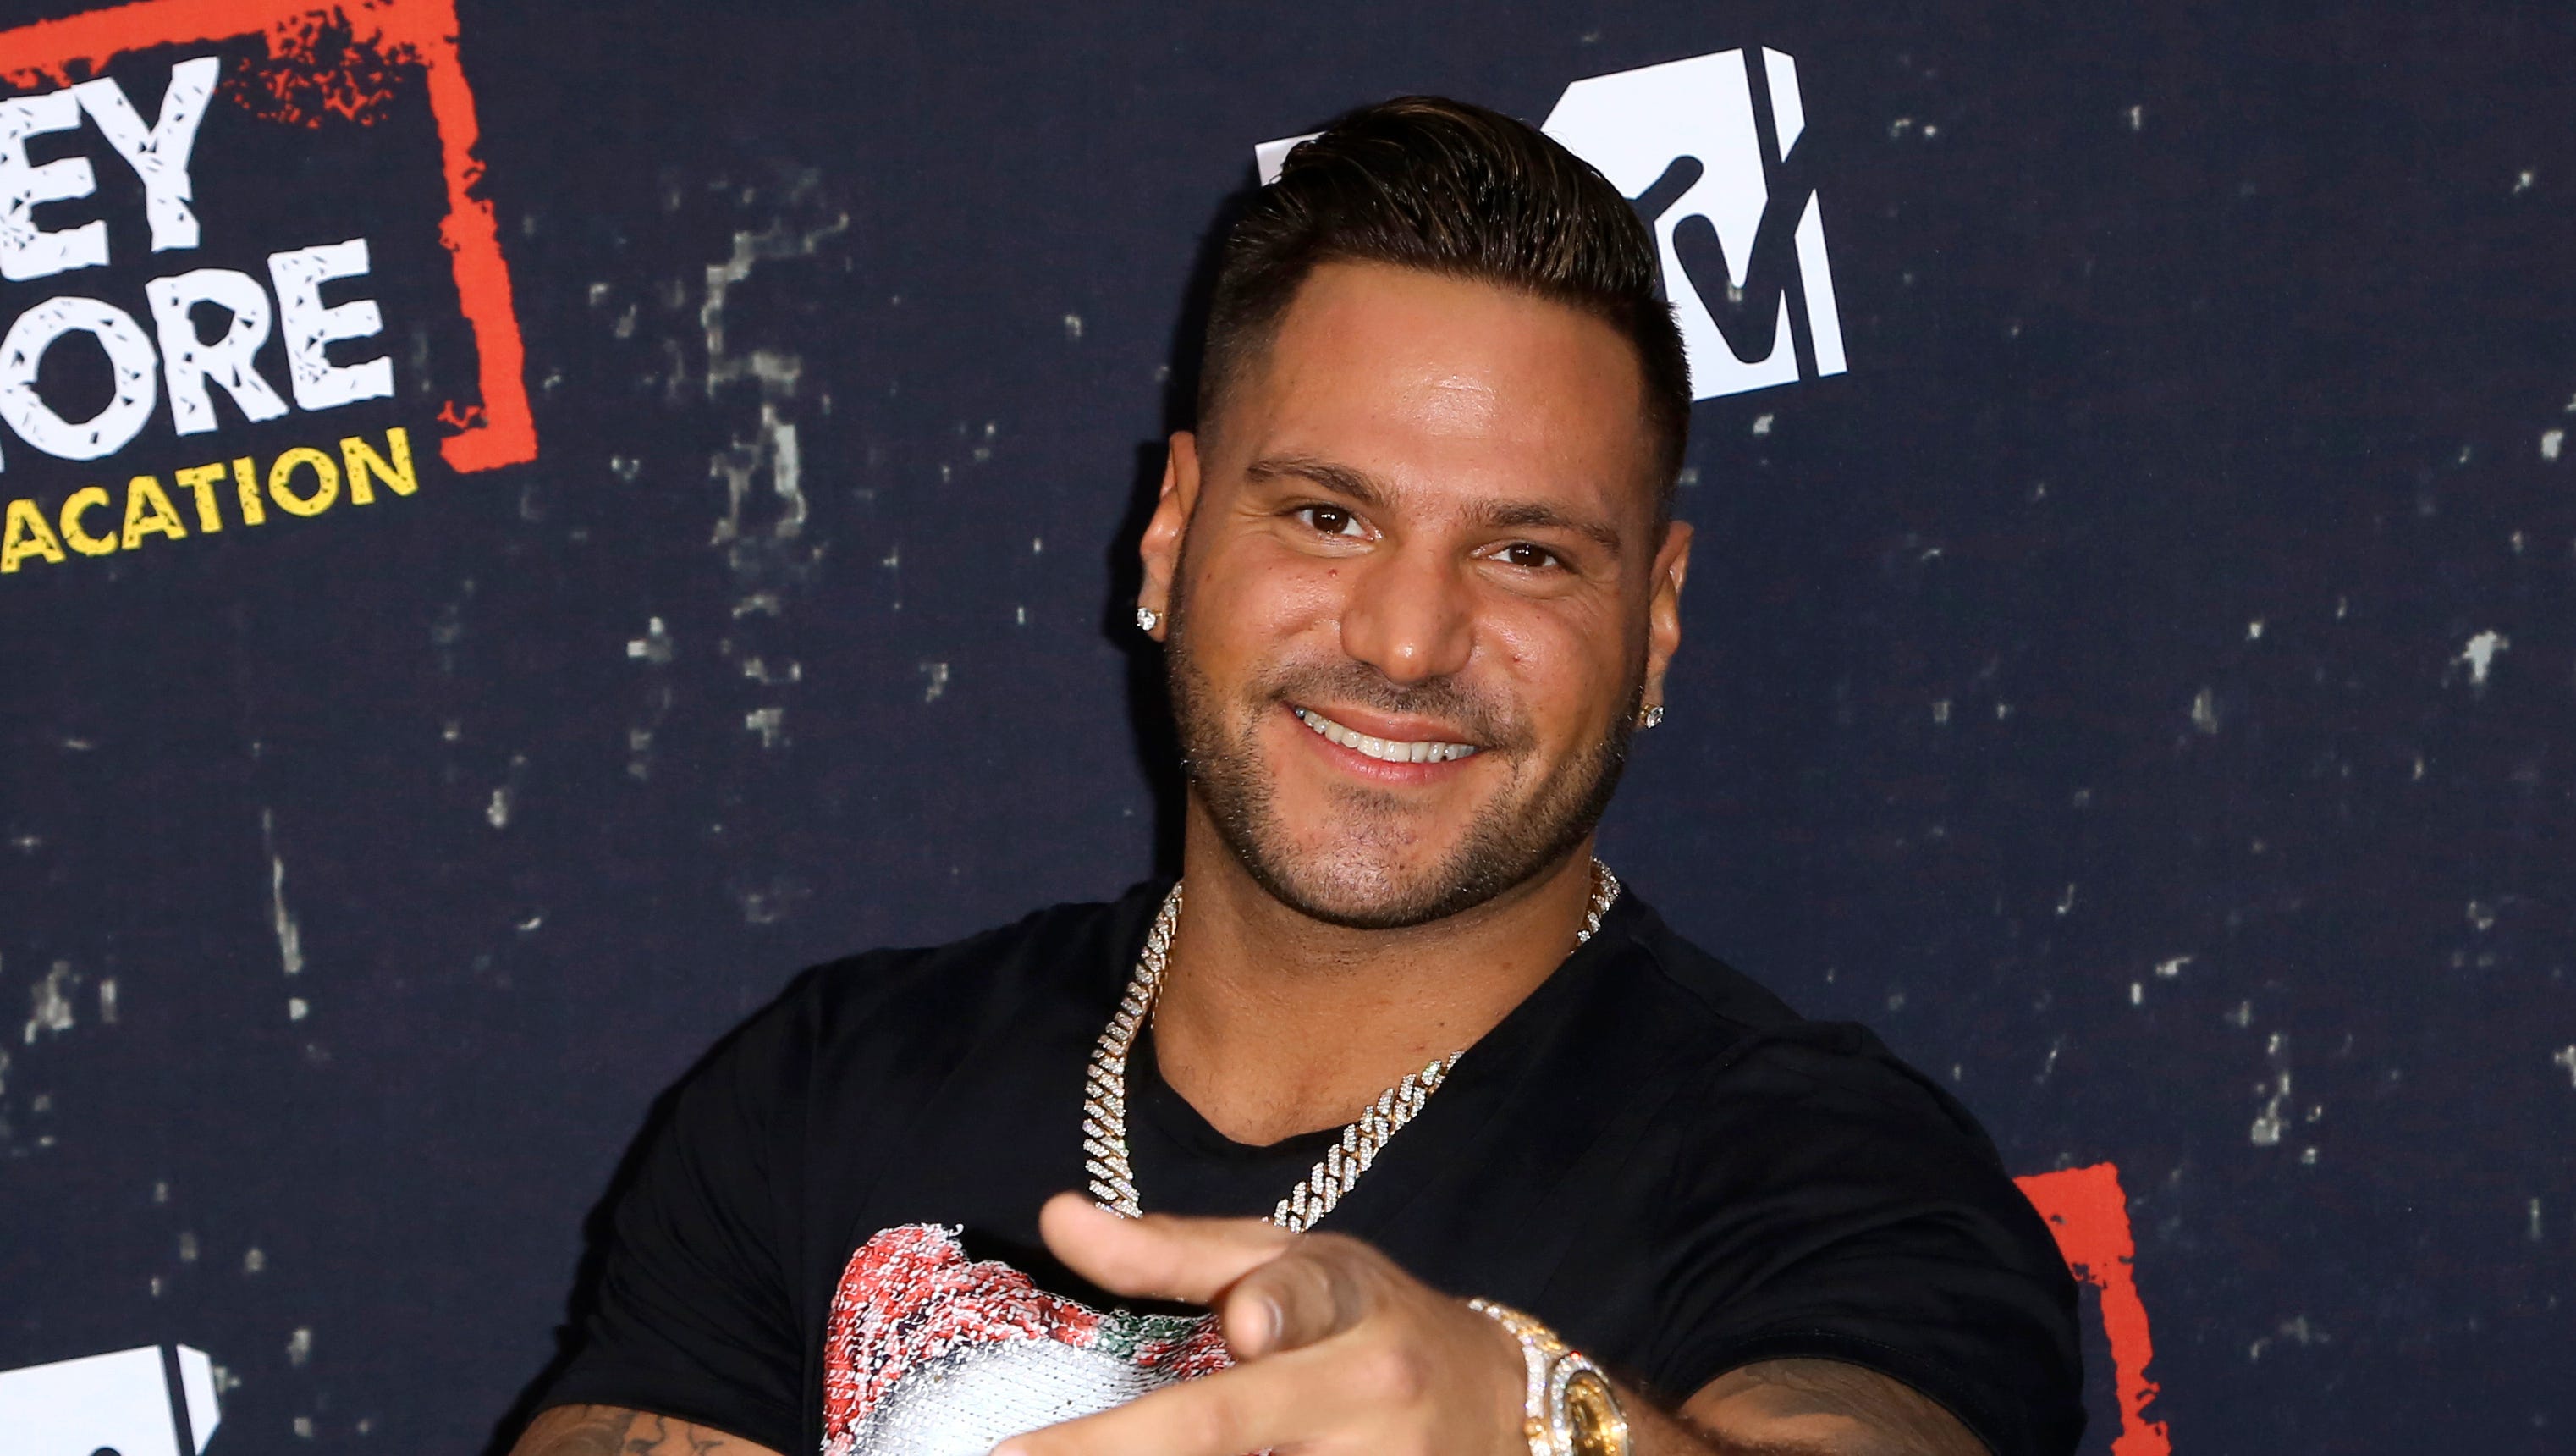 Ronnie Ortiz-Magro and Dean, his look-alike, at a Las Vegas event